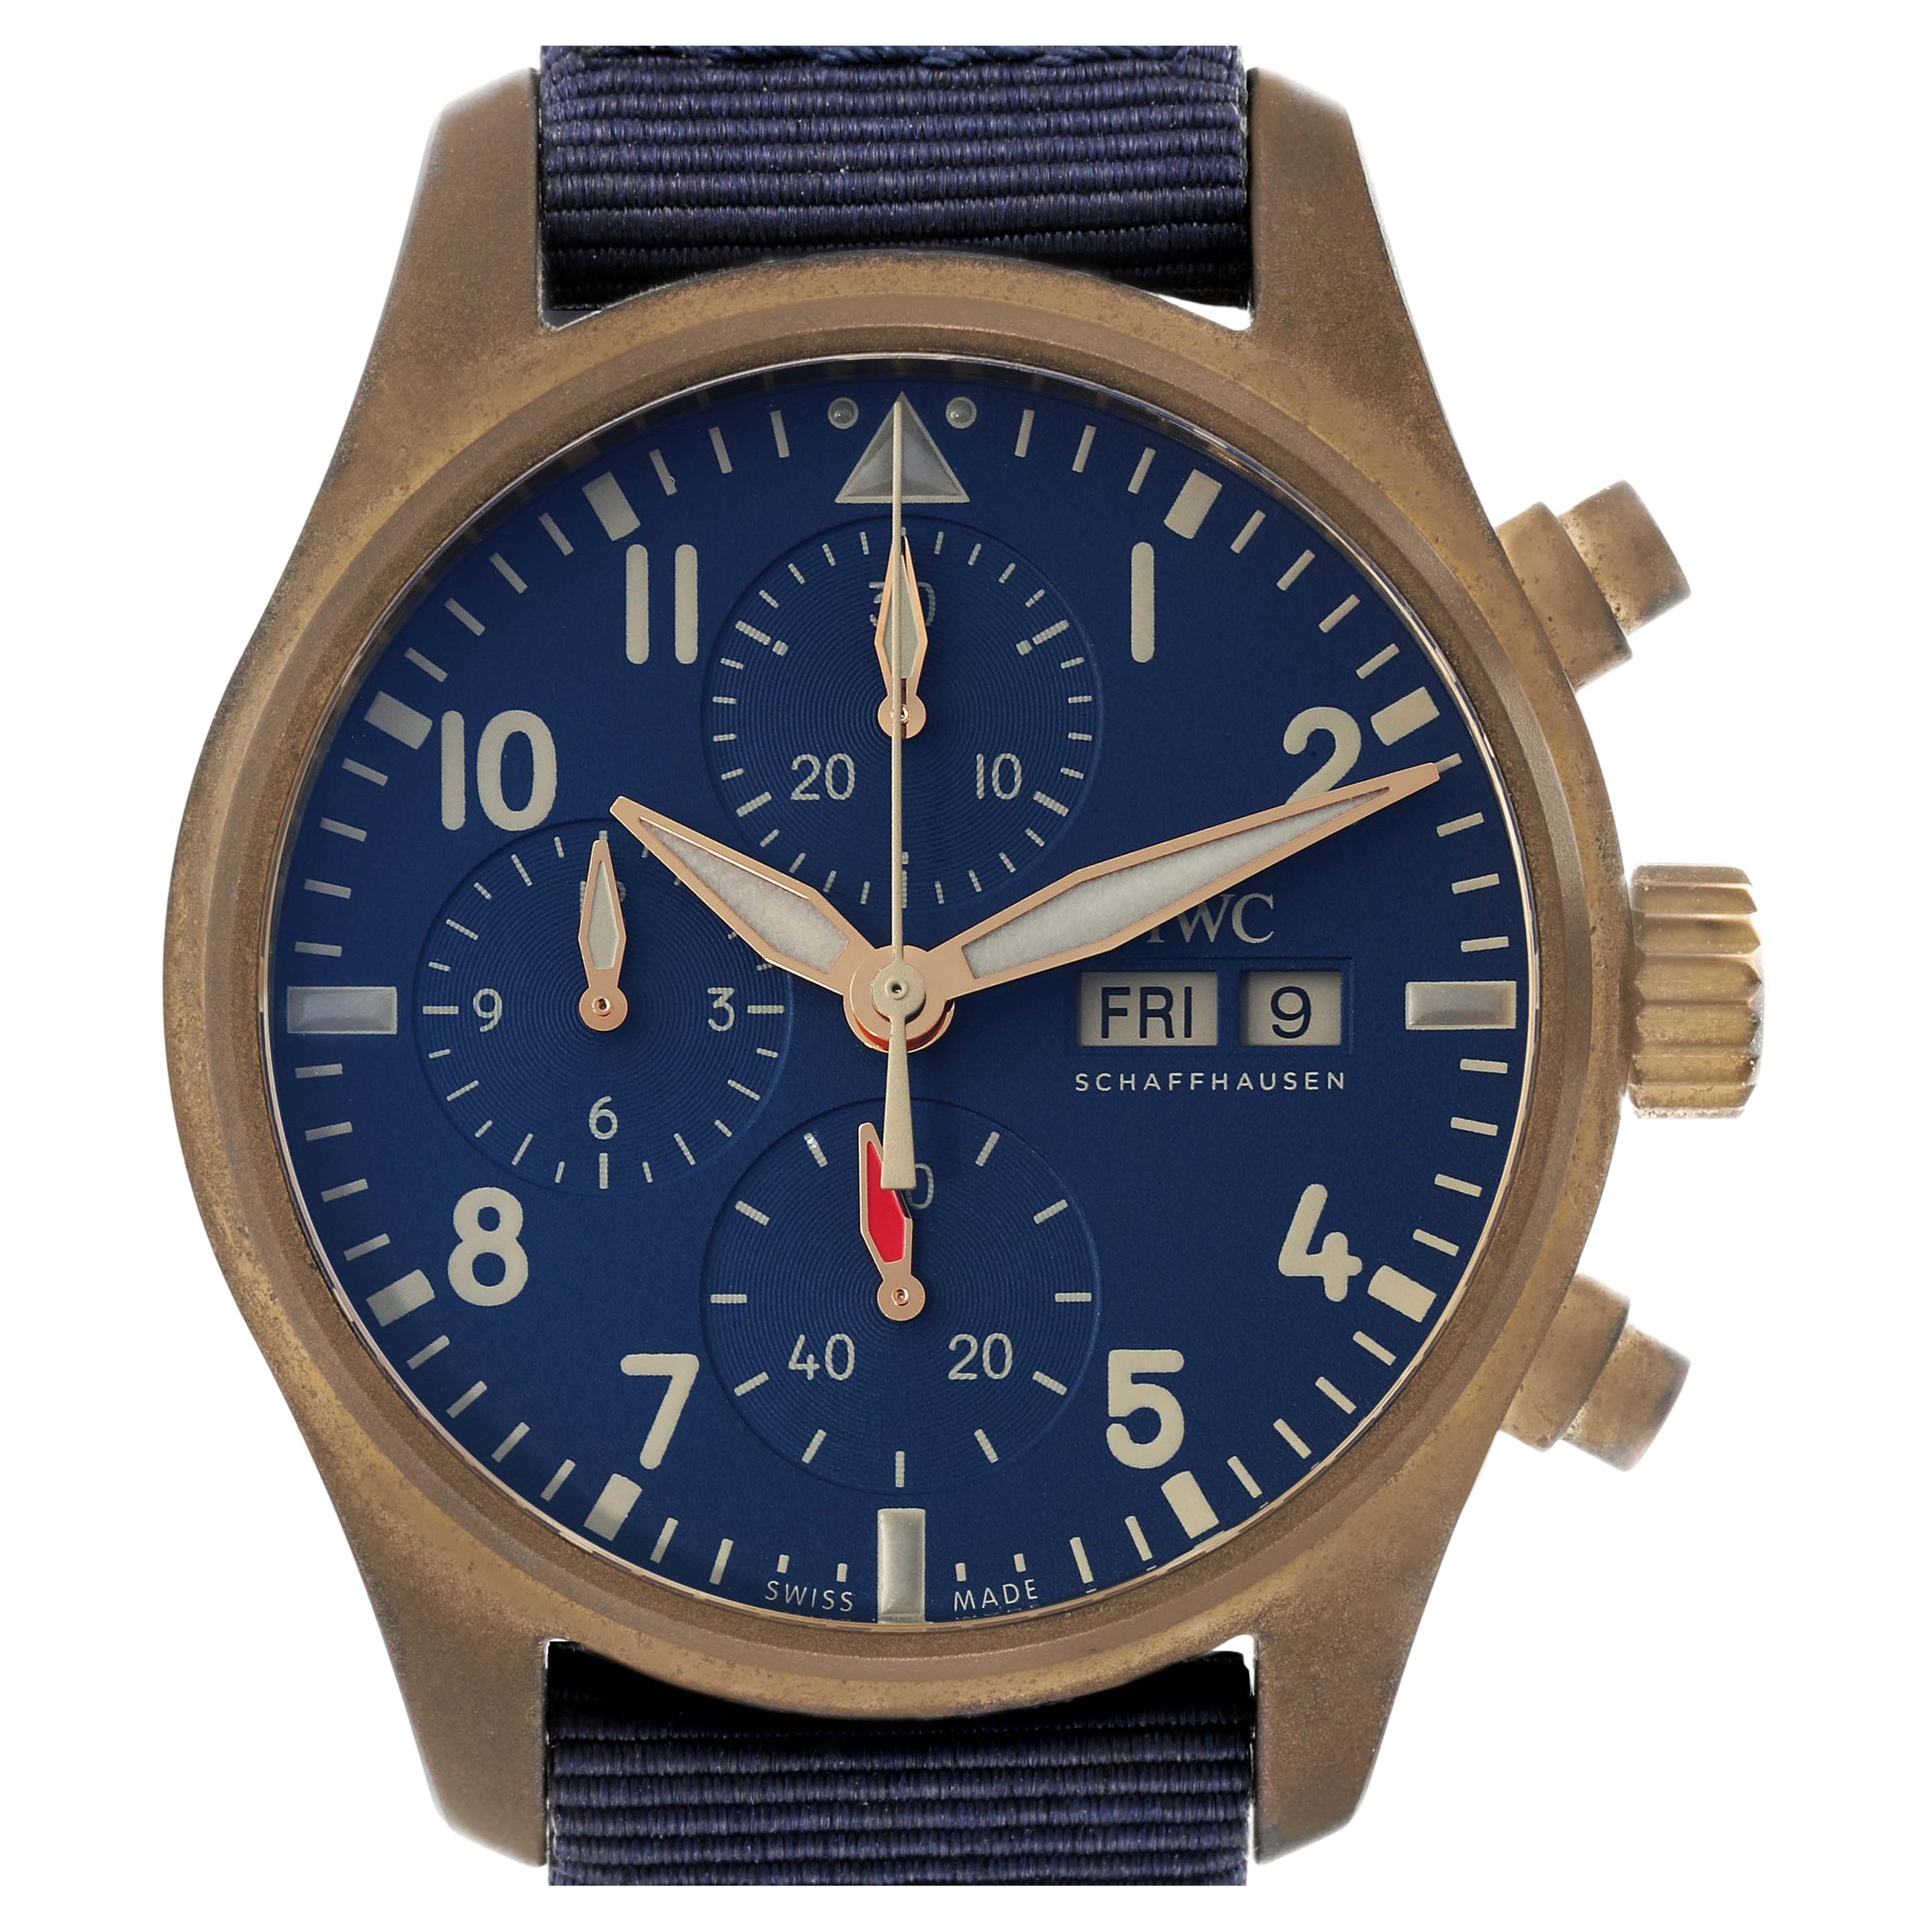 IWC Pilot Chronograph Blue Dial Mens Watch IW388109 Box Card For Sale